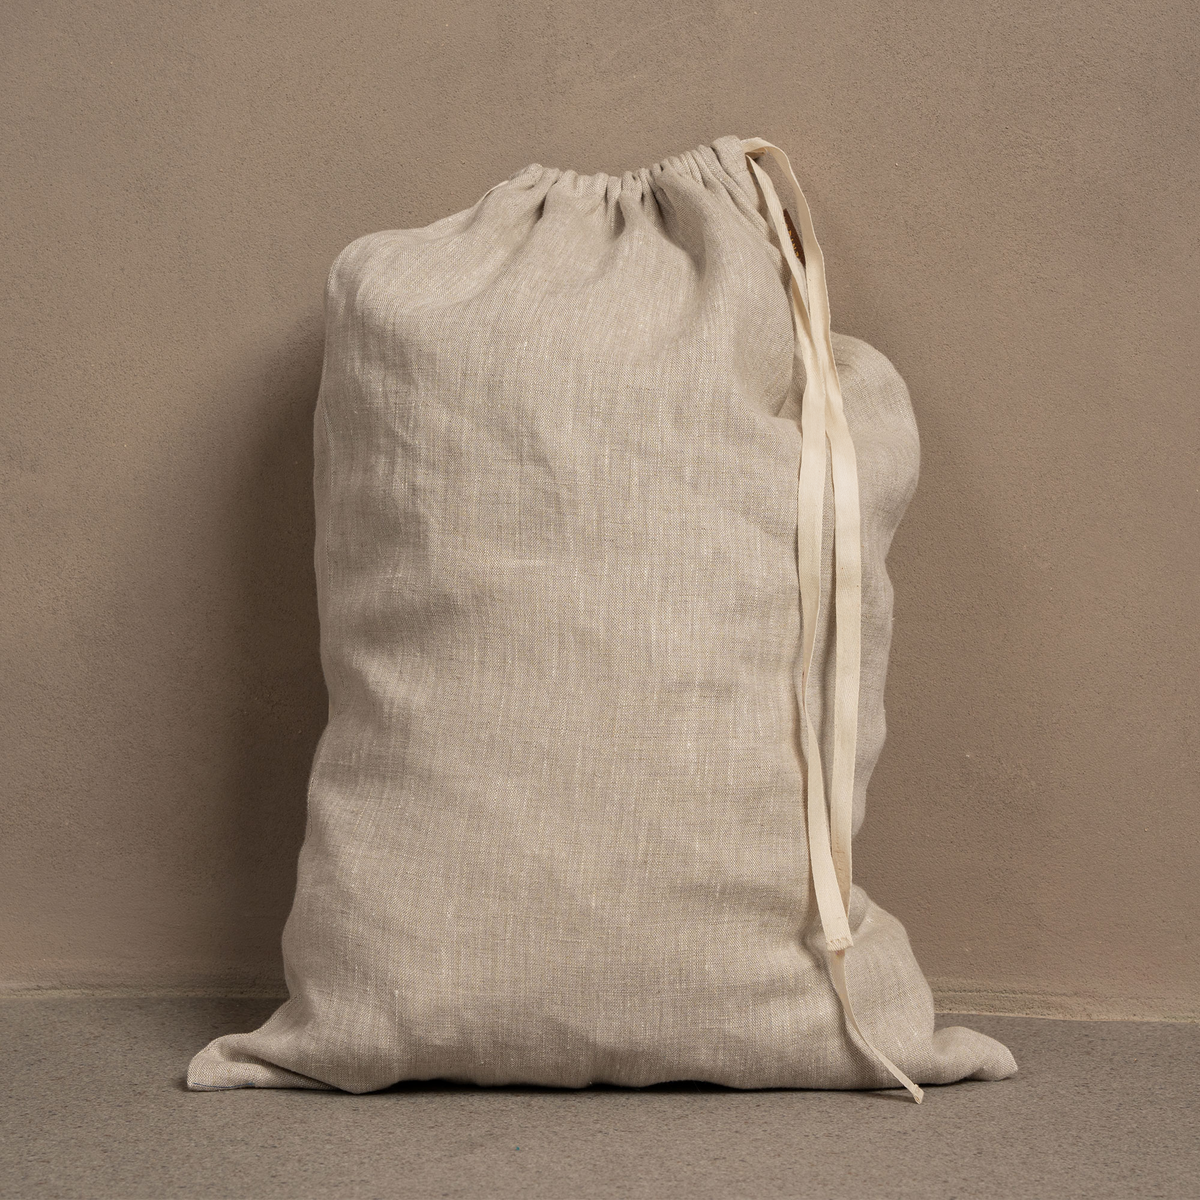 MENIQUE 100% Linen Laundry Bag with Drawstrings